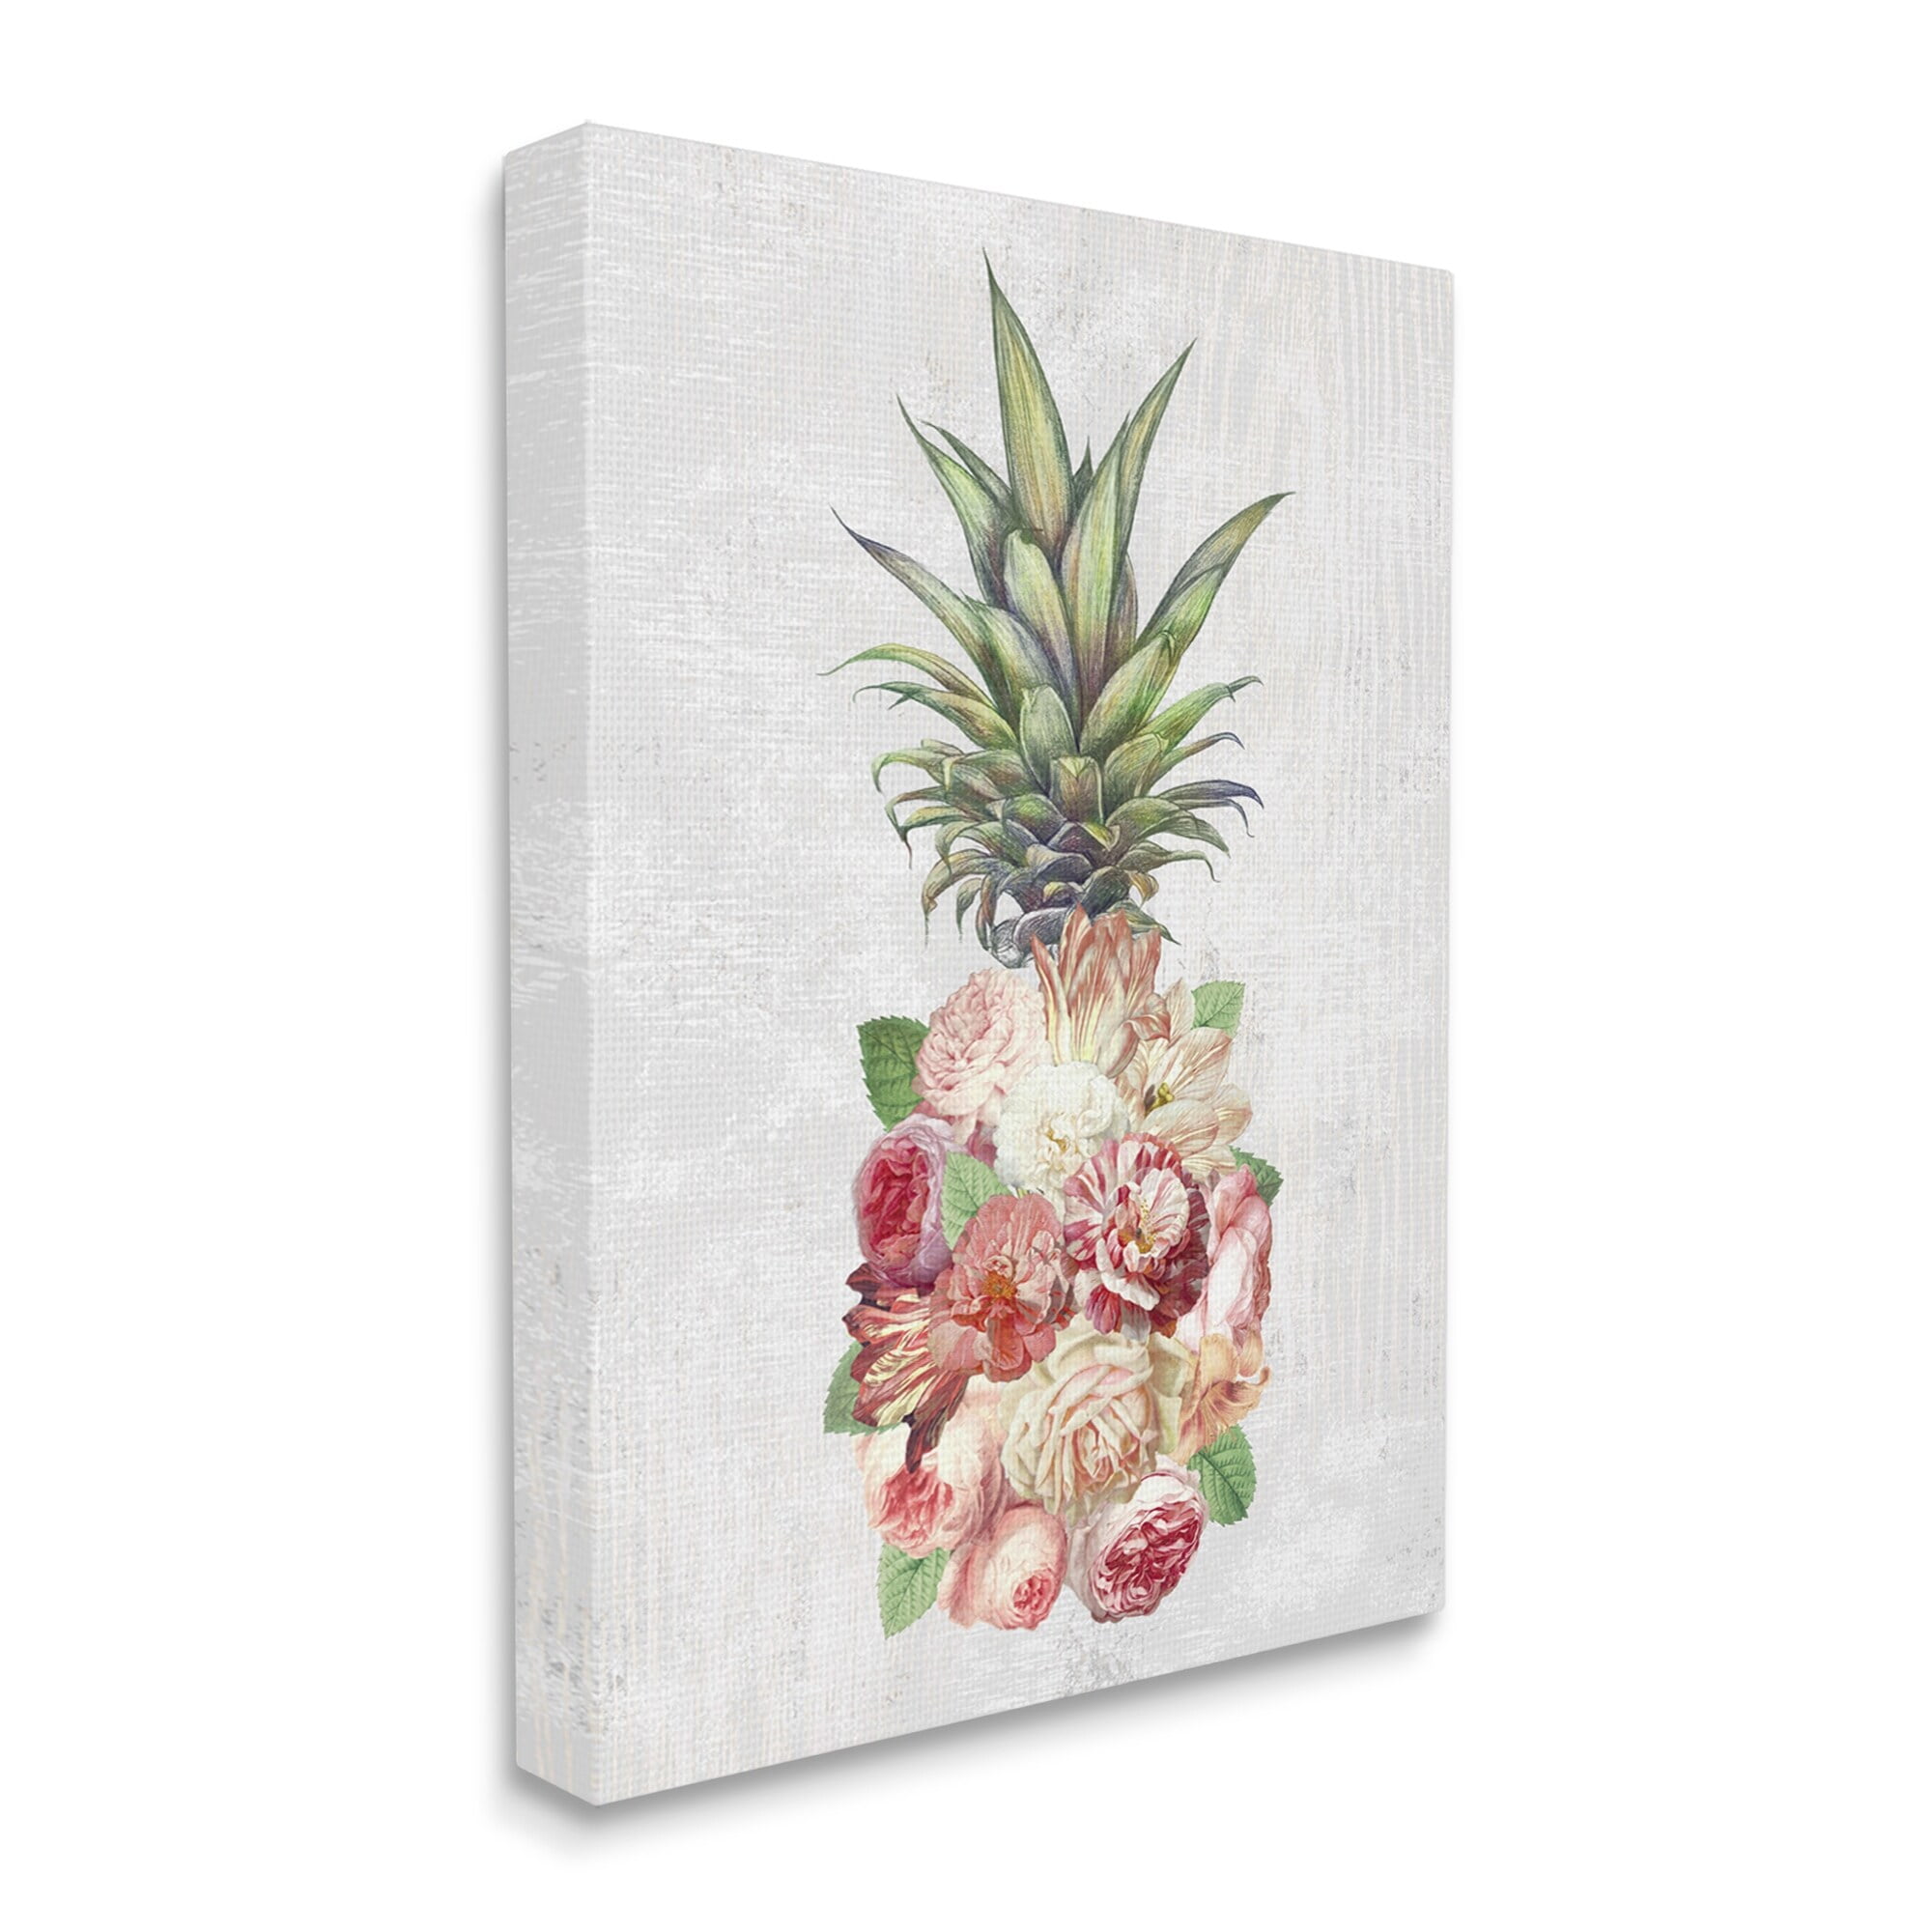 Stupell Industries Abstract Floral Pineapple Arrangement Pink Blooming  Flowers, 24 x 30,Design by Ziwei Li